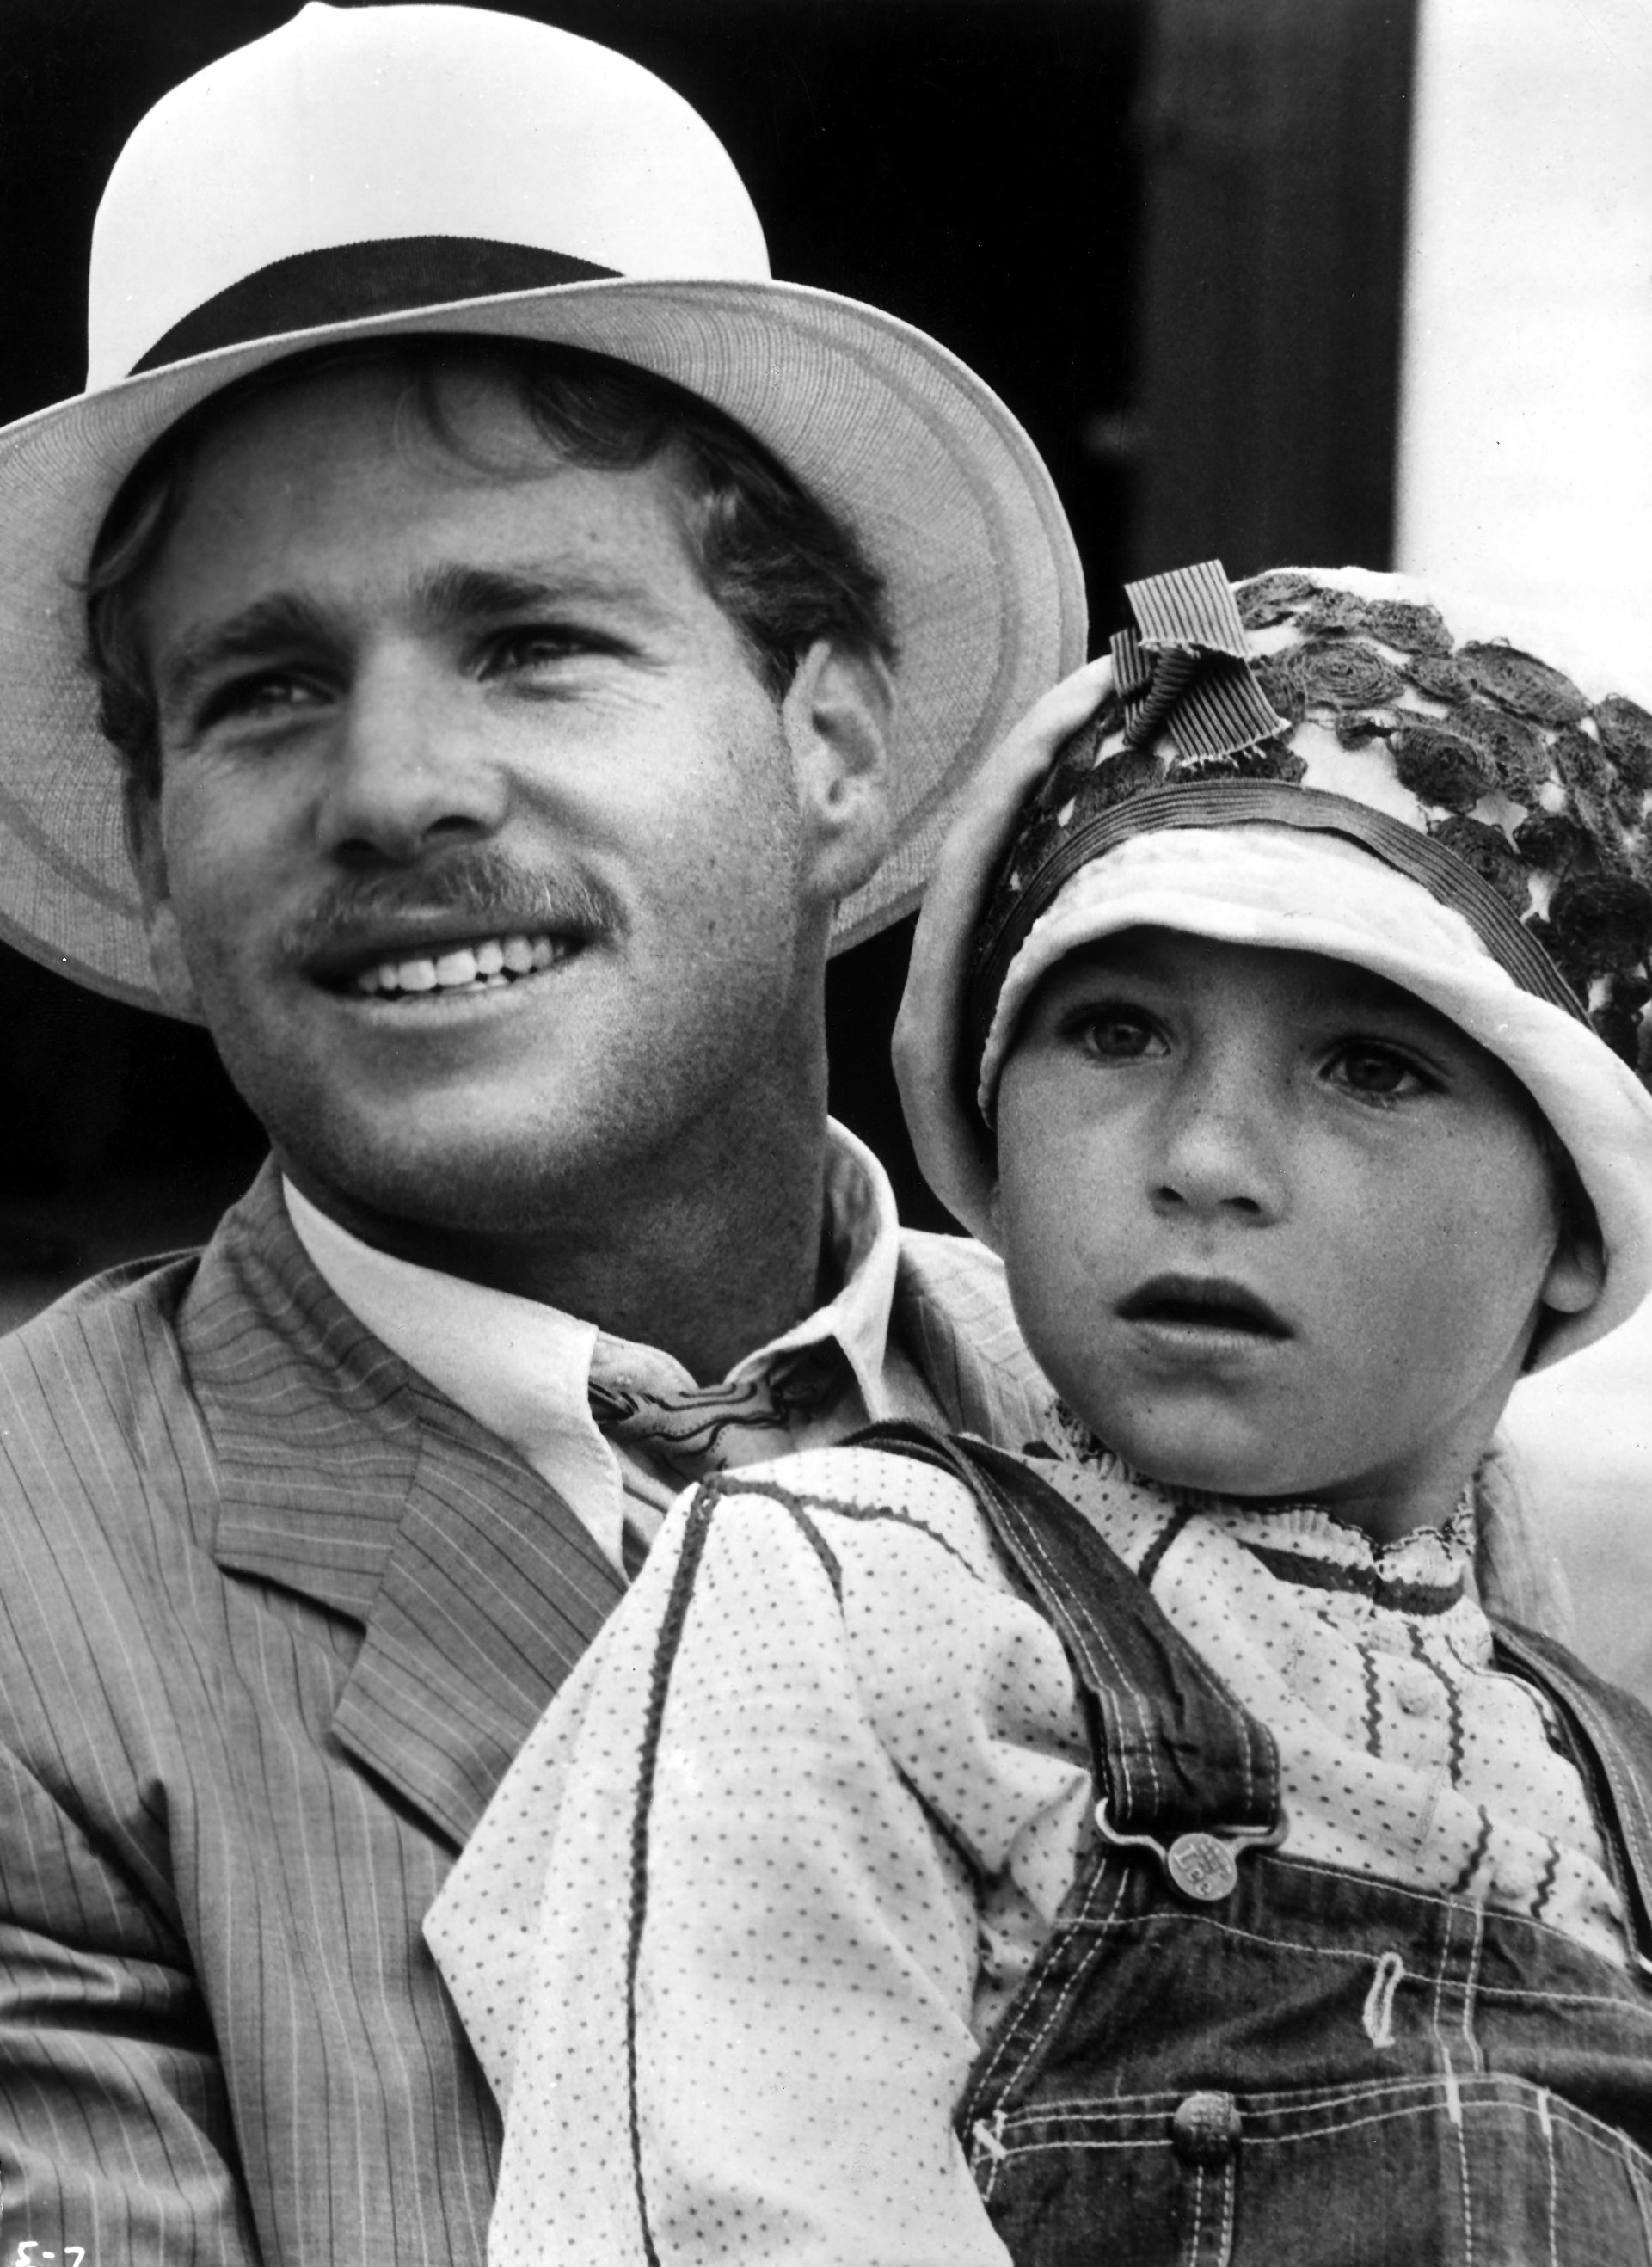 Ryan O'Neal and his daughter Tatum O'Neal for the film "Paper Moon" in 1972 | Source: Getty Images